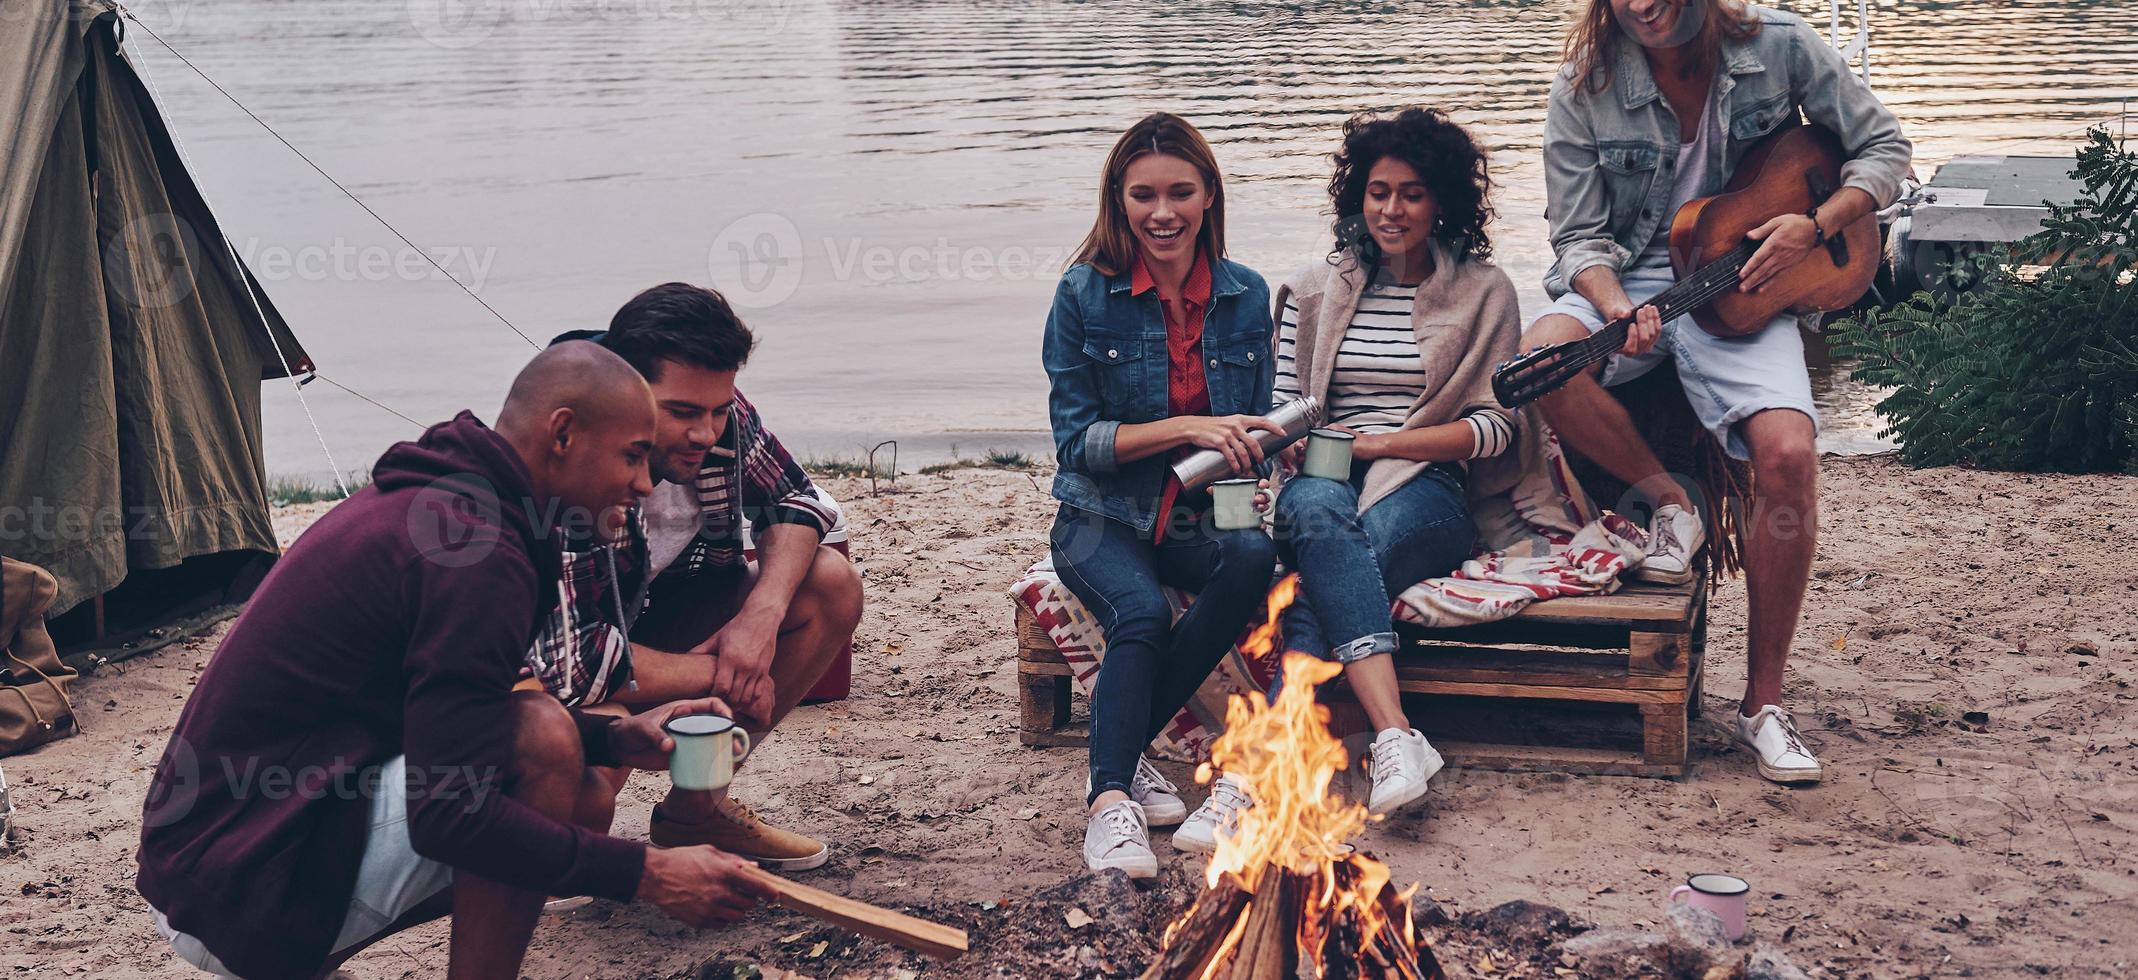 Getting away from it all... Group of young people in casual wear smiling while enjoying beach party near the campfire photo